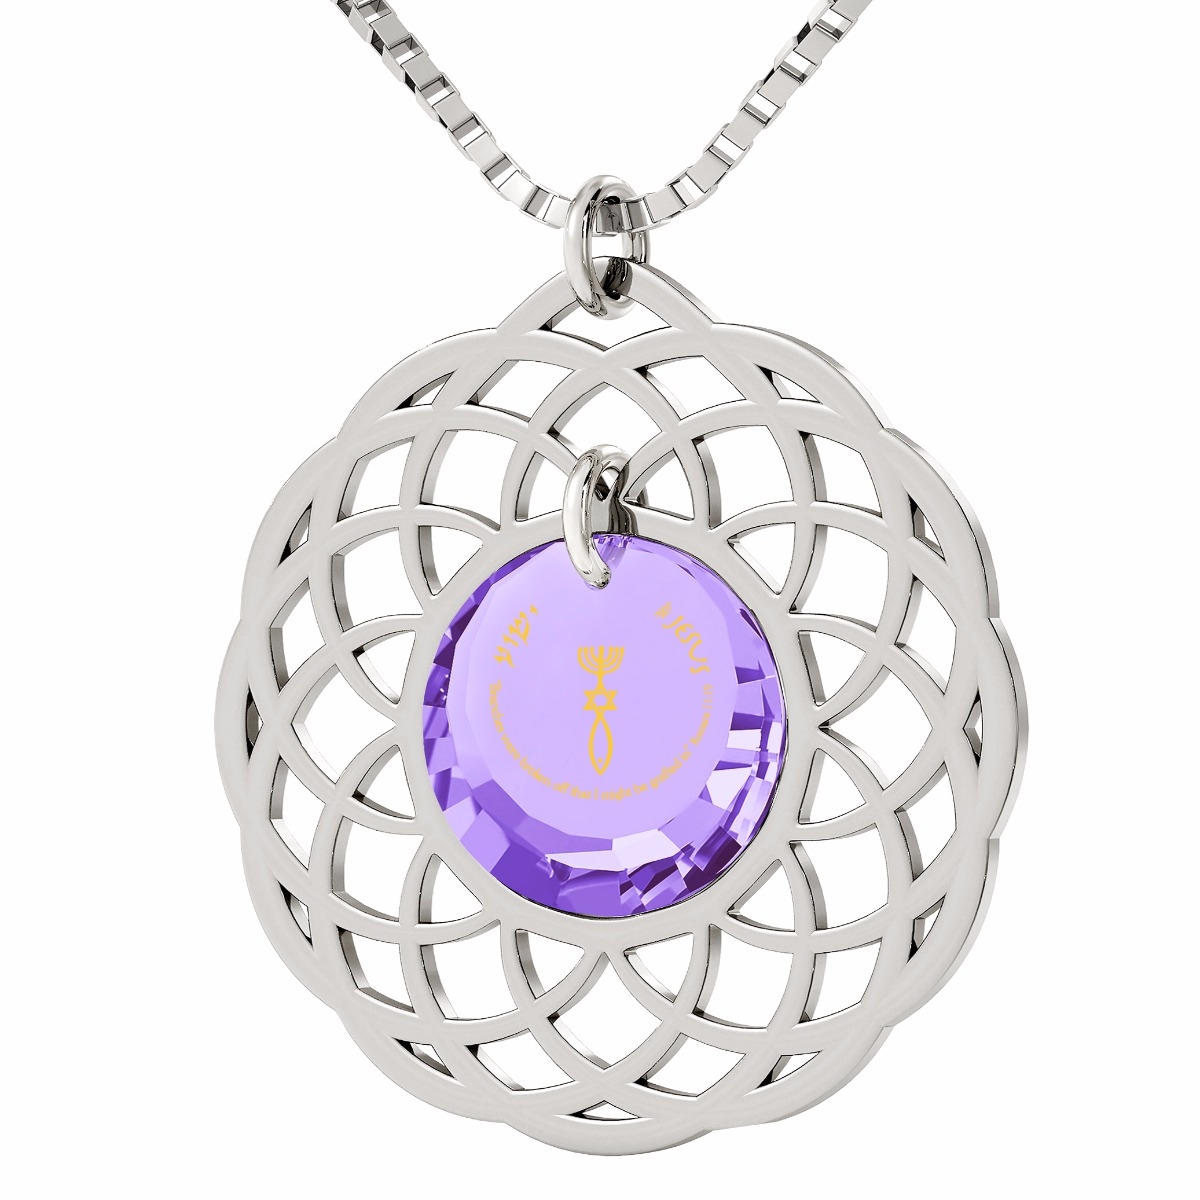 Nano Sterling Silver & Crystal Grafted-In Mandala Necklace with 24k Gold Micro-Inscription (Purple) - 1